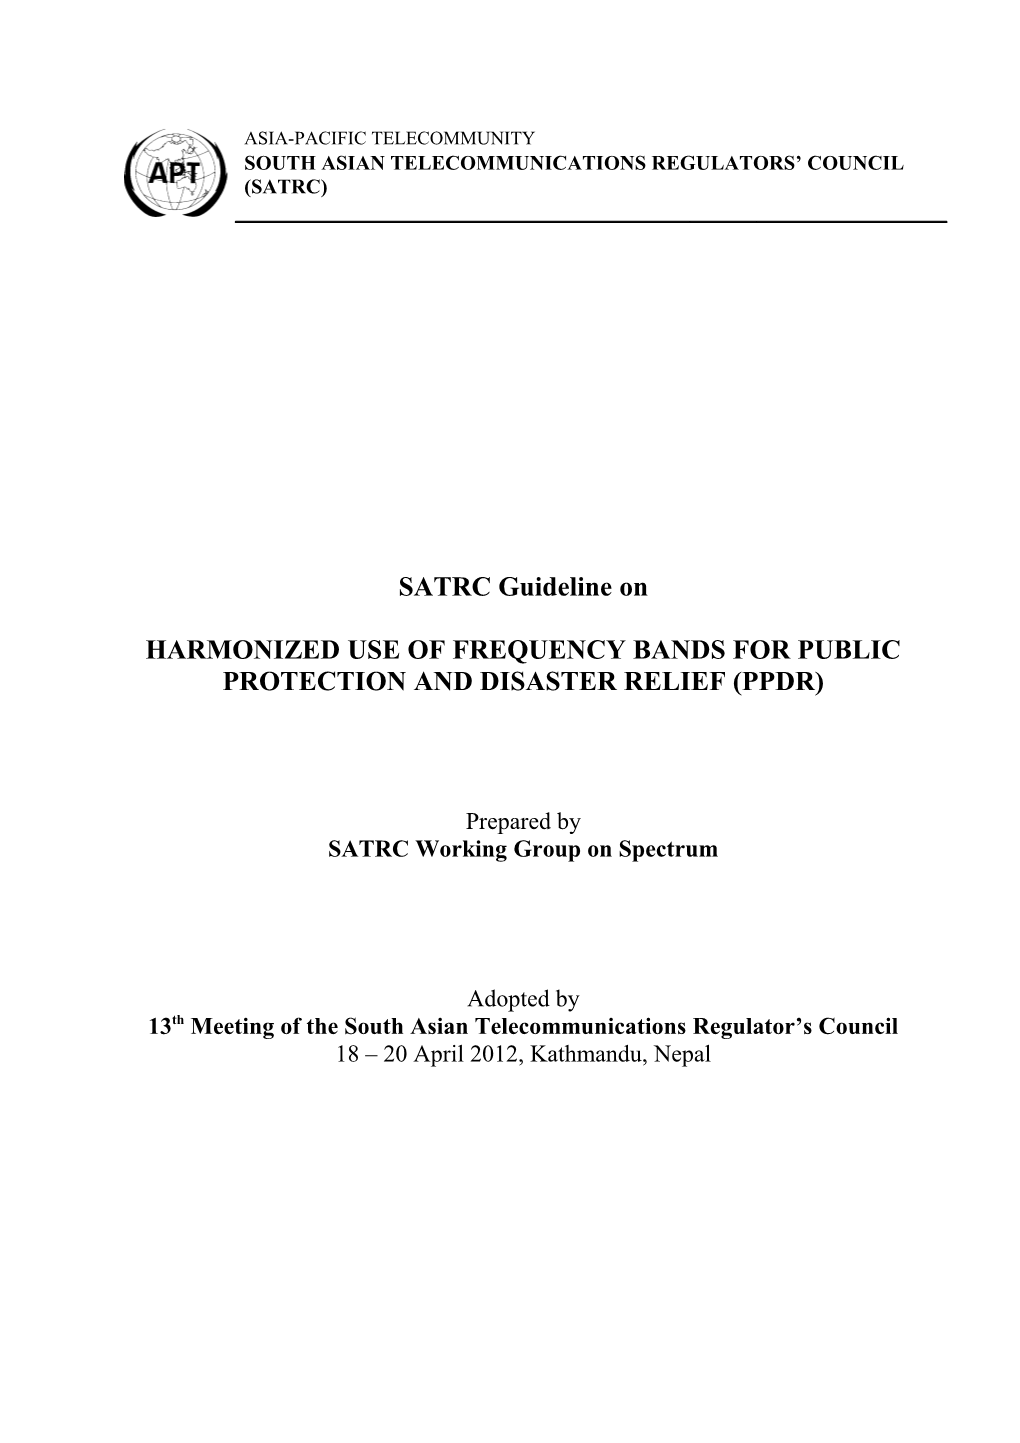 Harmonized Use of Frequency Bands for Public Protection and Disaster Relief (Ppdr)